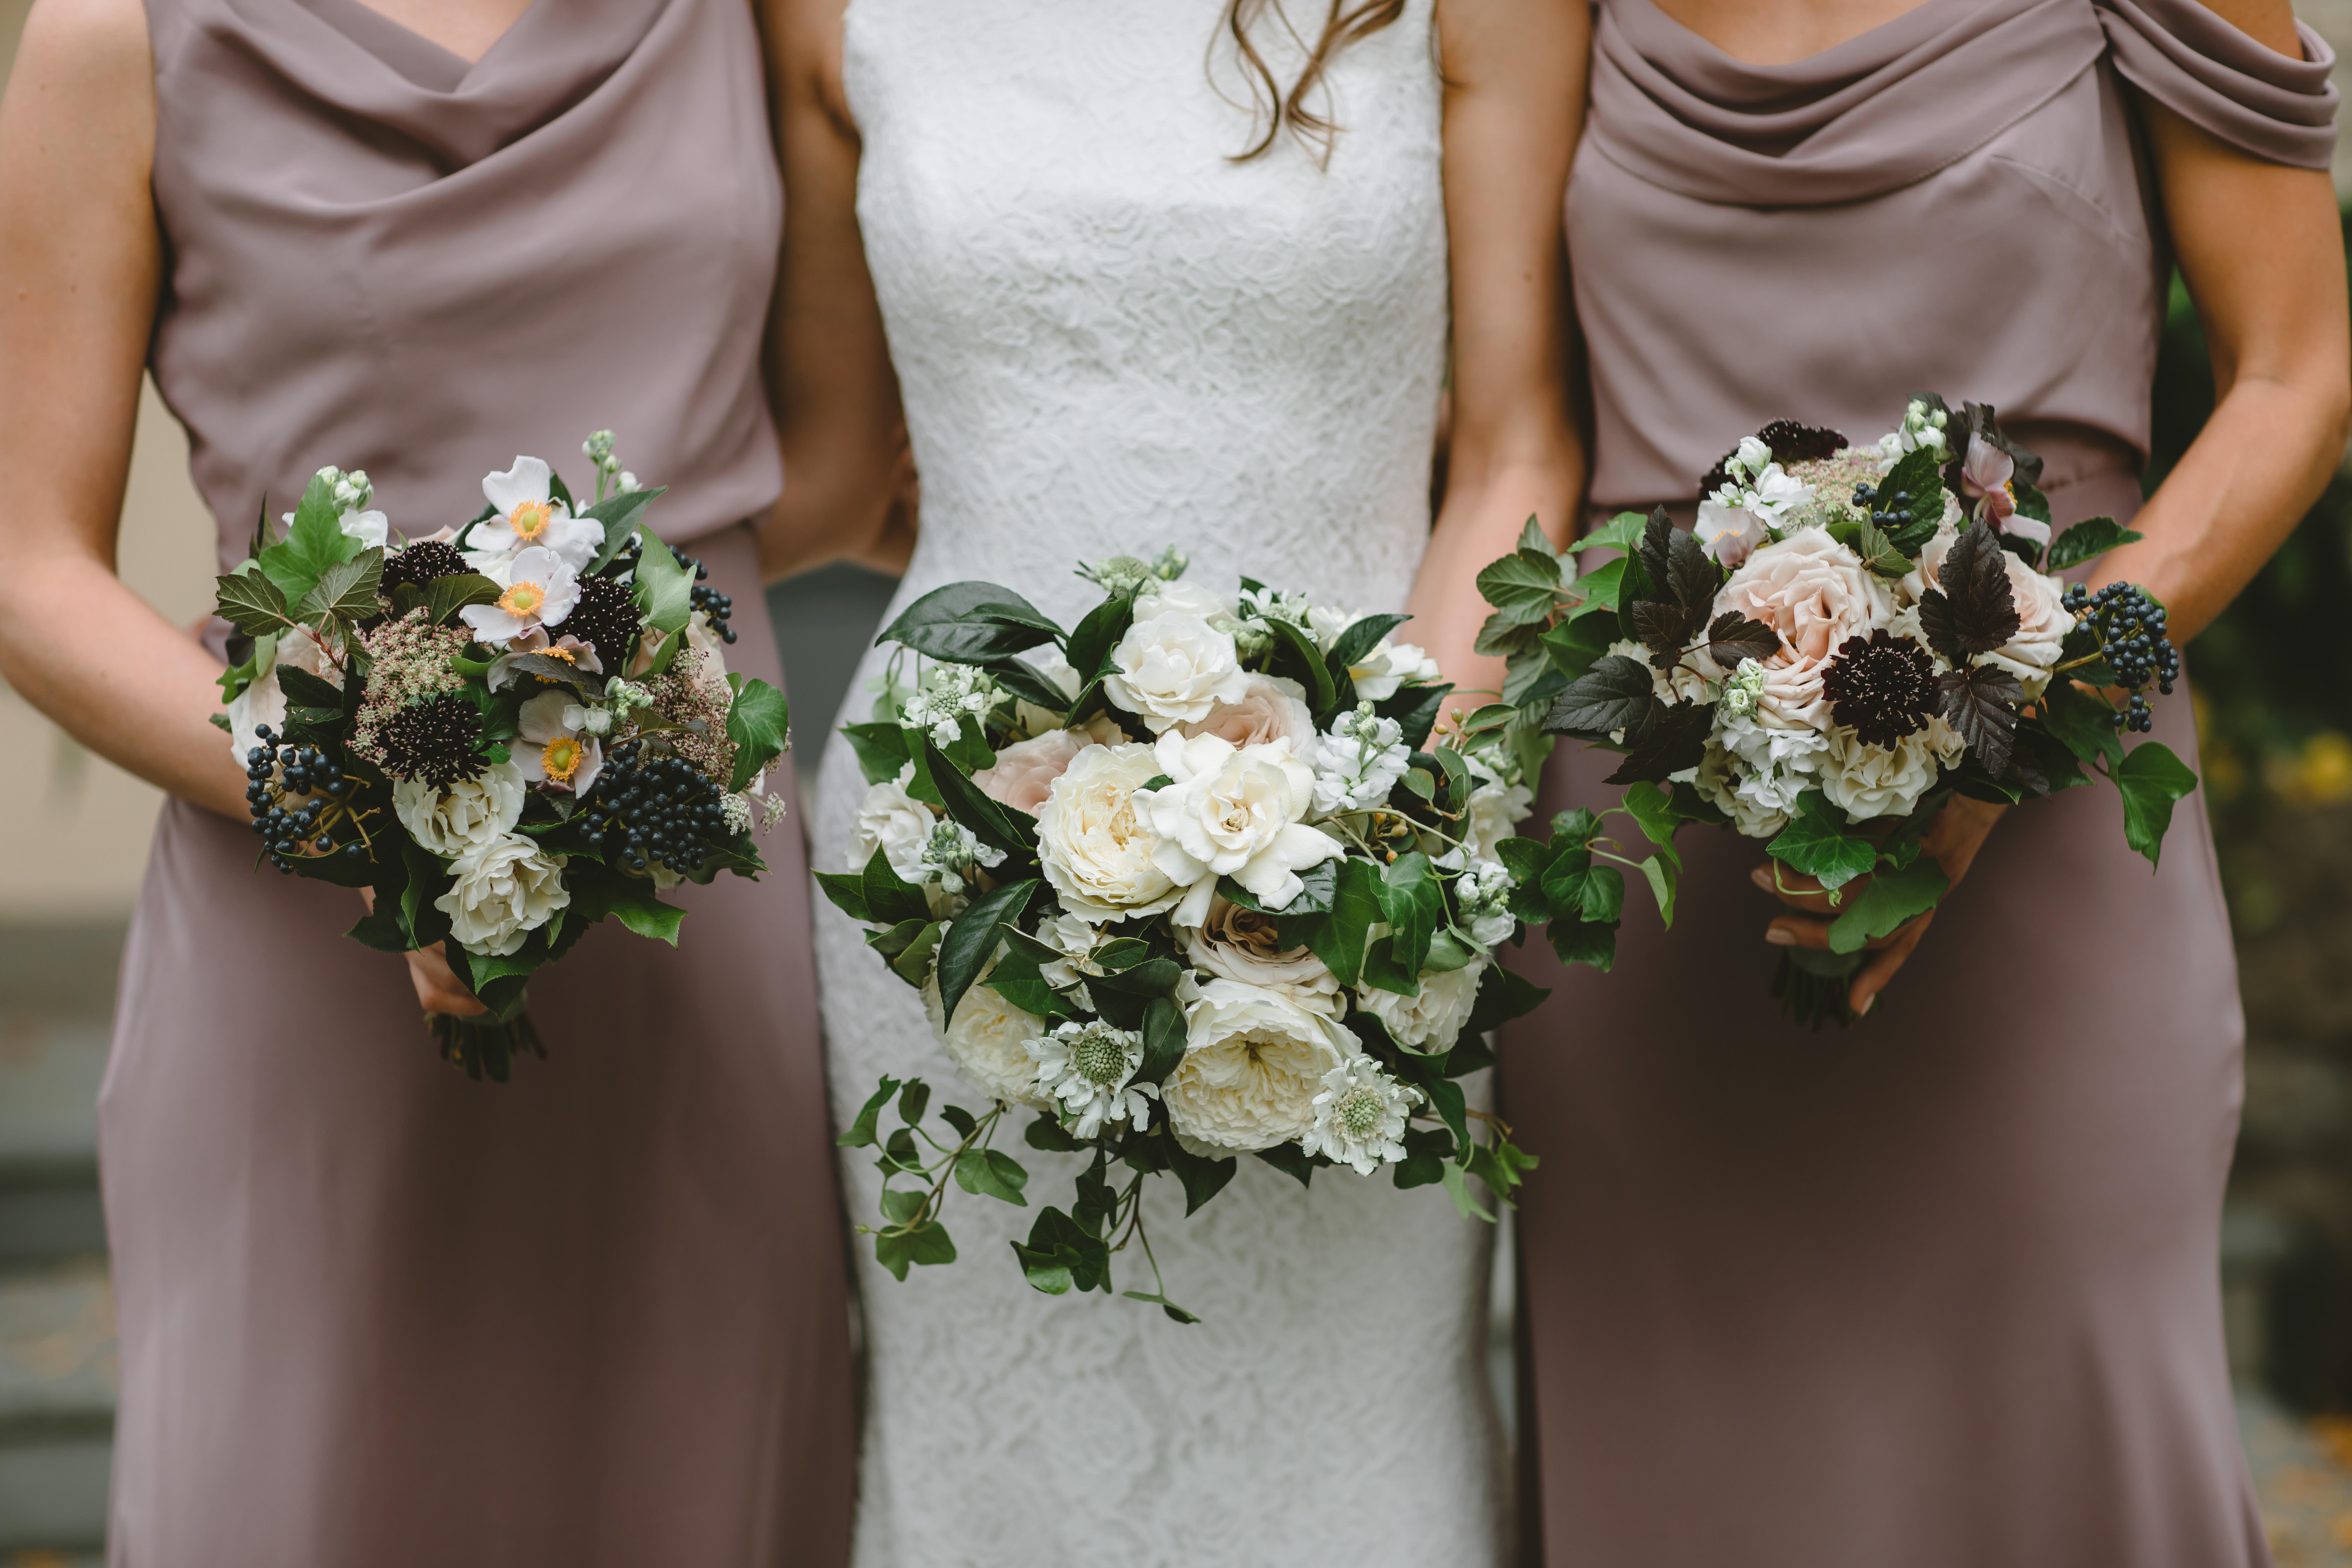 Mauve, burgundy, navy, blush, and ivory bridesmaids bouquets with fig bridesmaids' dresses from Jenny Yoo